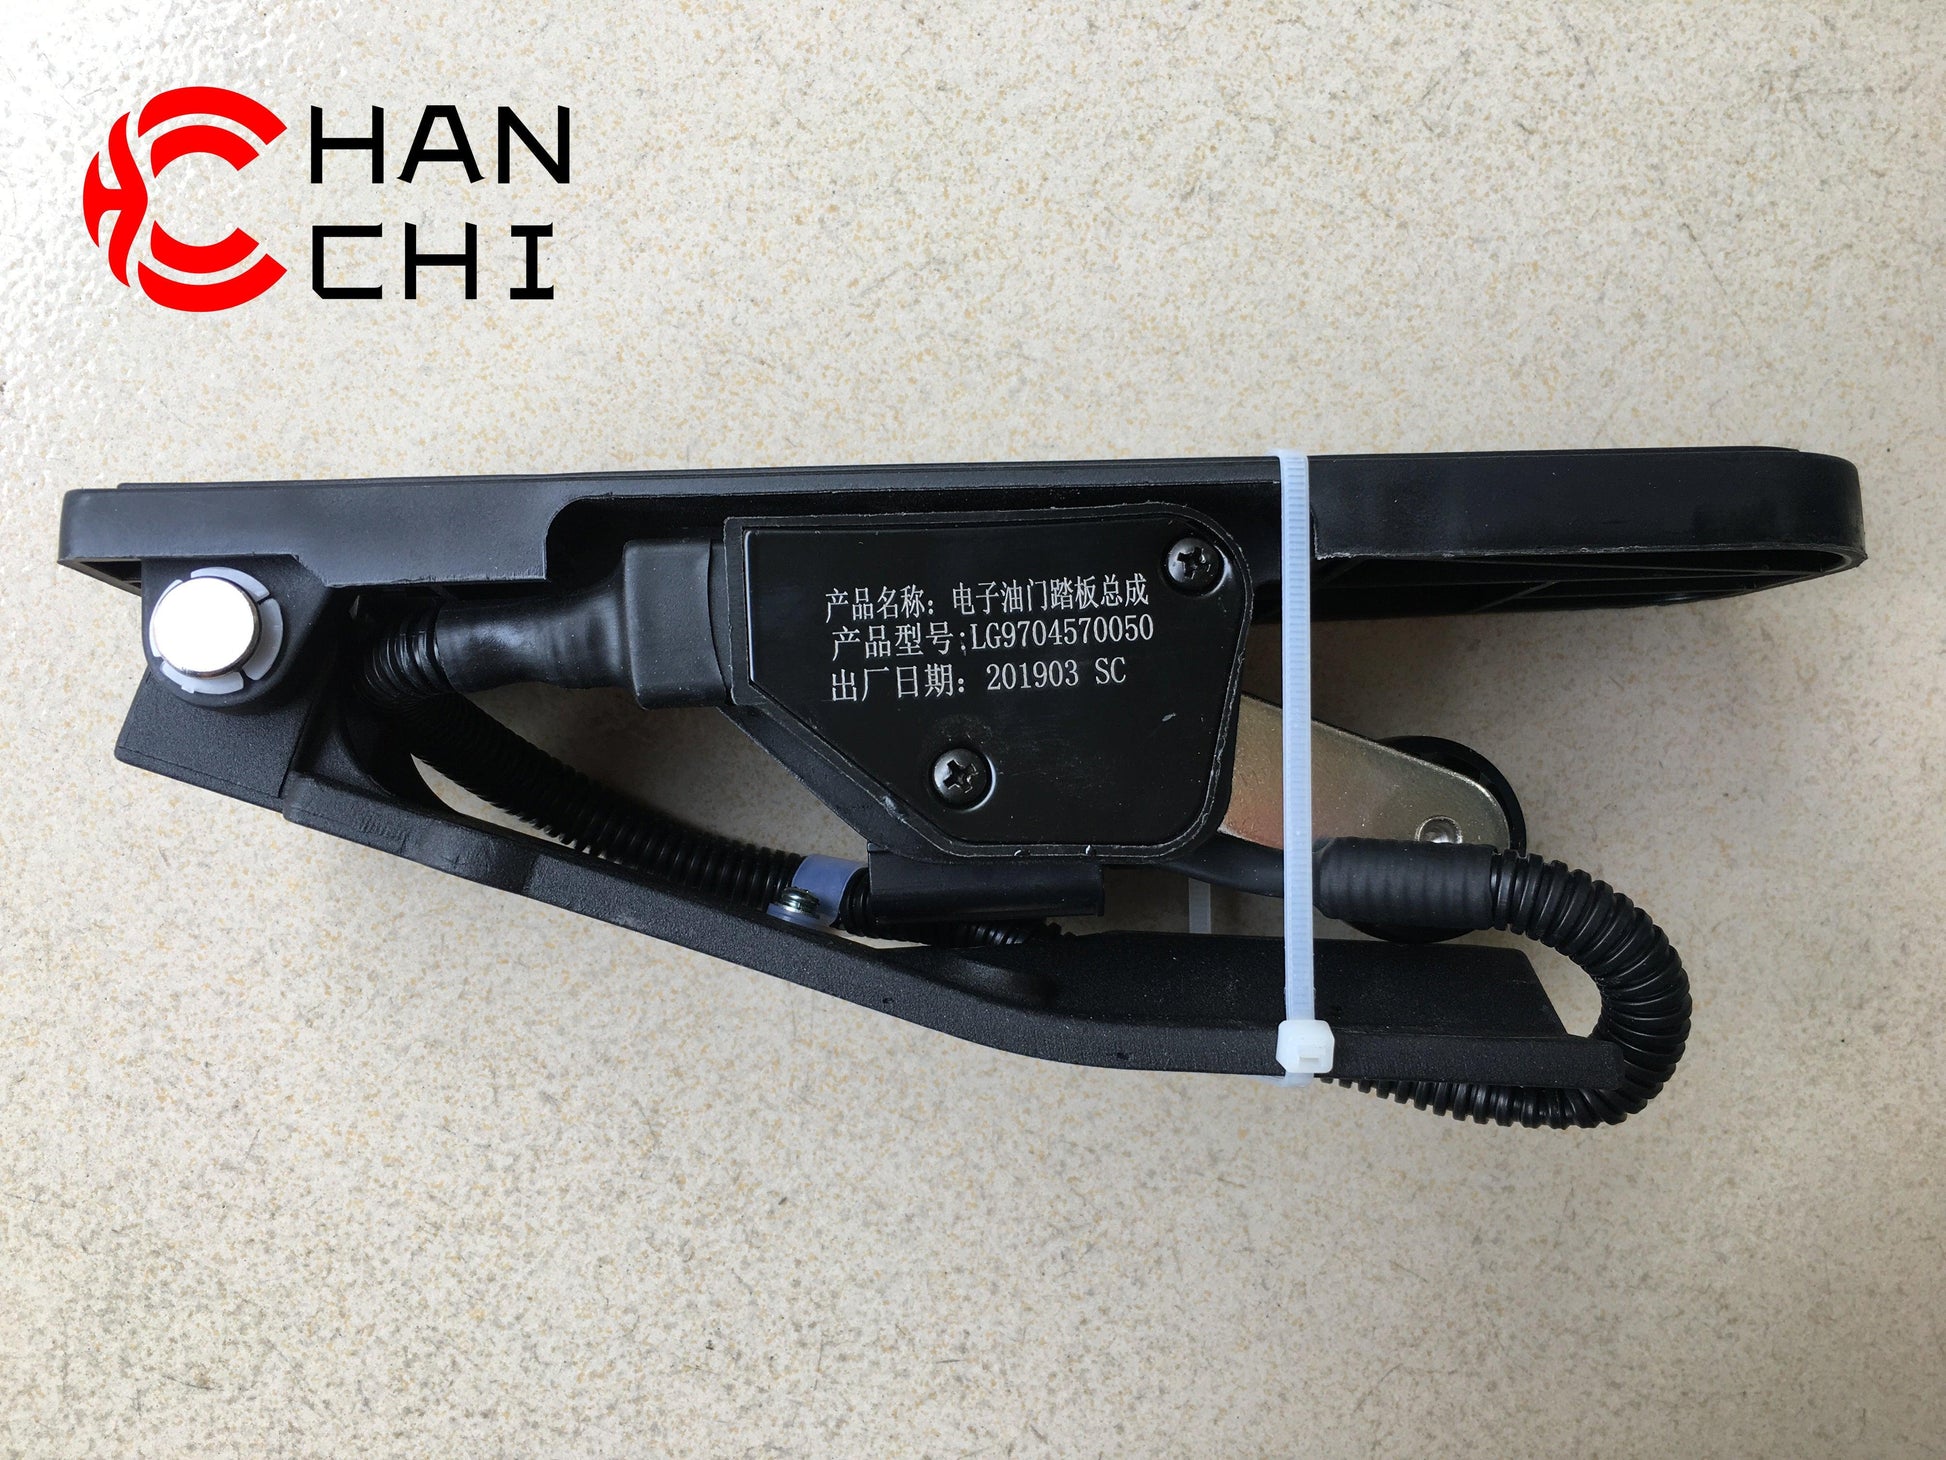 【Description】---☀Welcome to HANCHI☀---✔Good Quality✔Generally Applicability✔Competitive PriceEnjoy your shopping time↖（^ω^）↗【Features】Brand-New with High Quality for the Aftermarket.Totally mathced your need.**Stable Quality**High Precision**Easy Installation**【Specification】OEM：LG9704570050Material：ABSColor：blackOrigin：Made in ChinaWeight：1000g【Packing List】1* Electronic Accelerator Pedal 【More Service】 We can provide OEM service We can Be your one-step solution for Auto Parts We can provide te